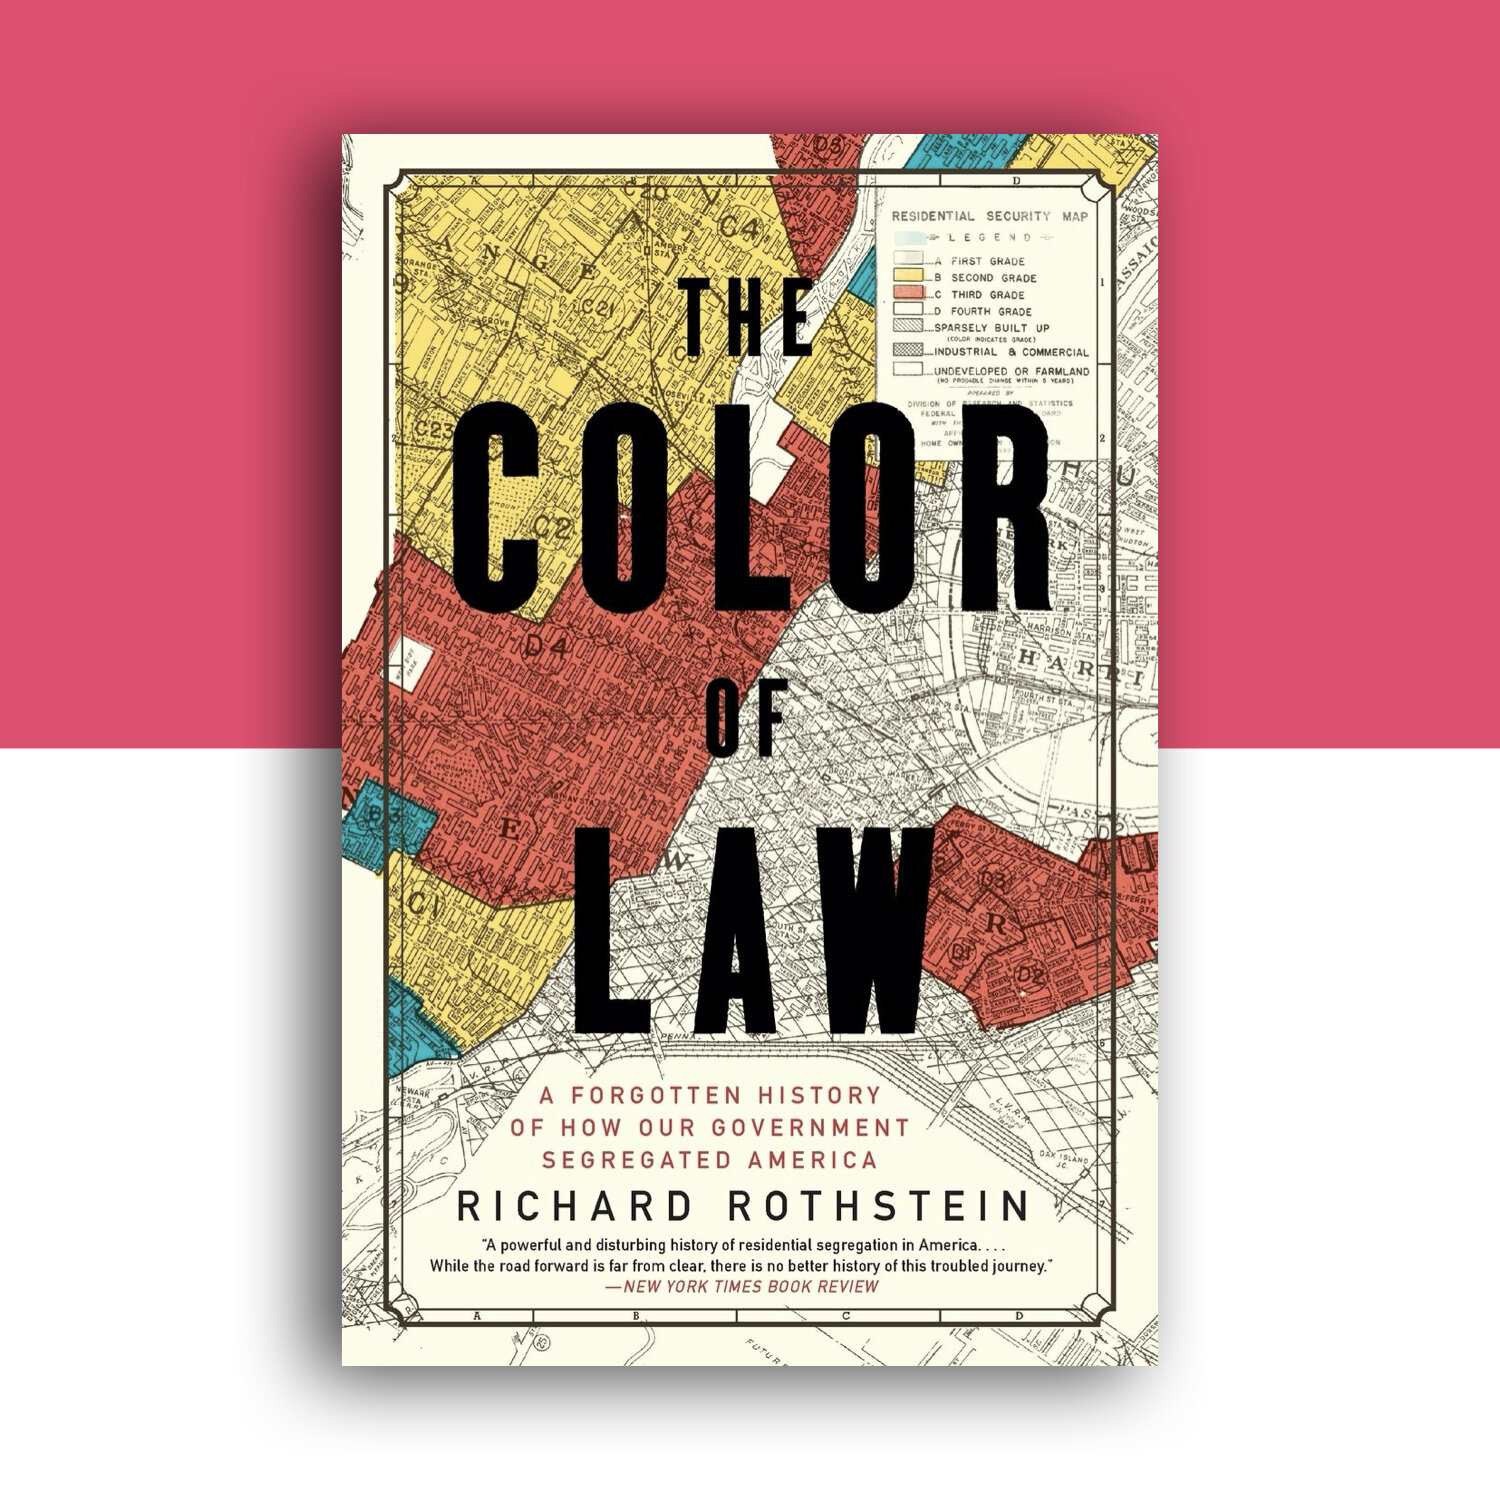 equality-superbloom-book-the-color-of-law.jpeg